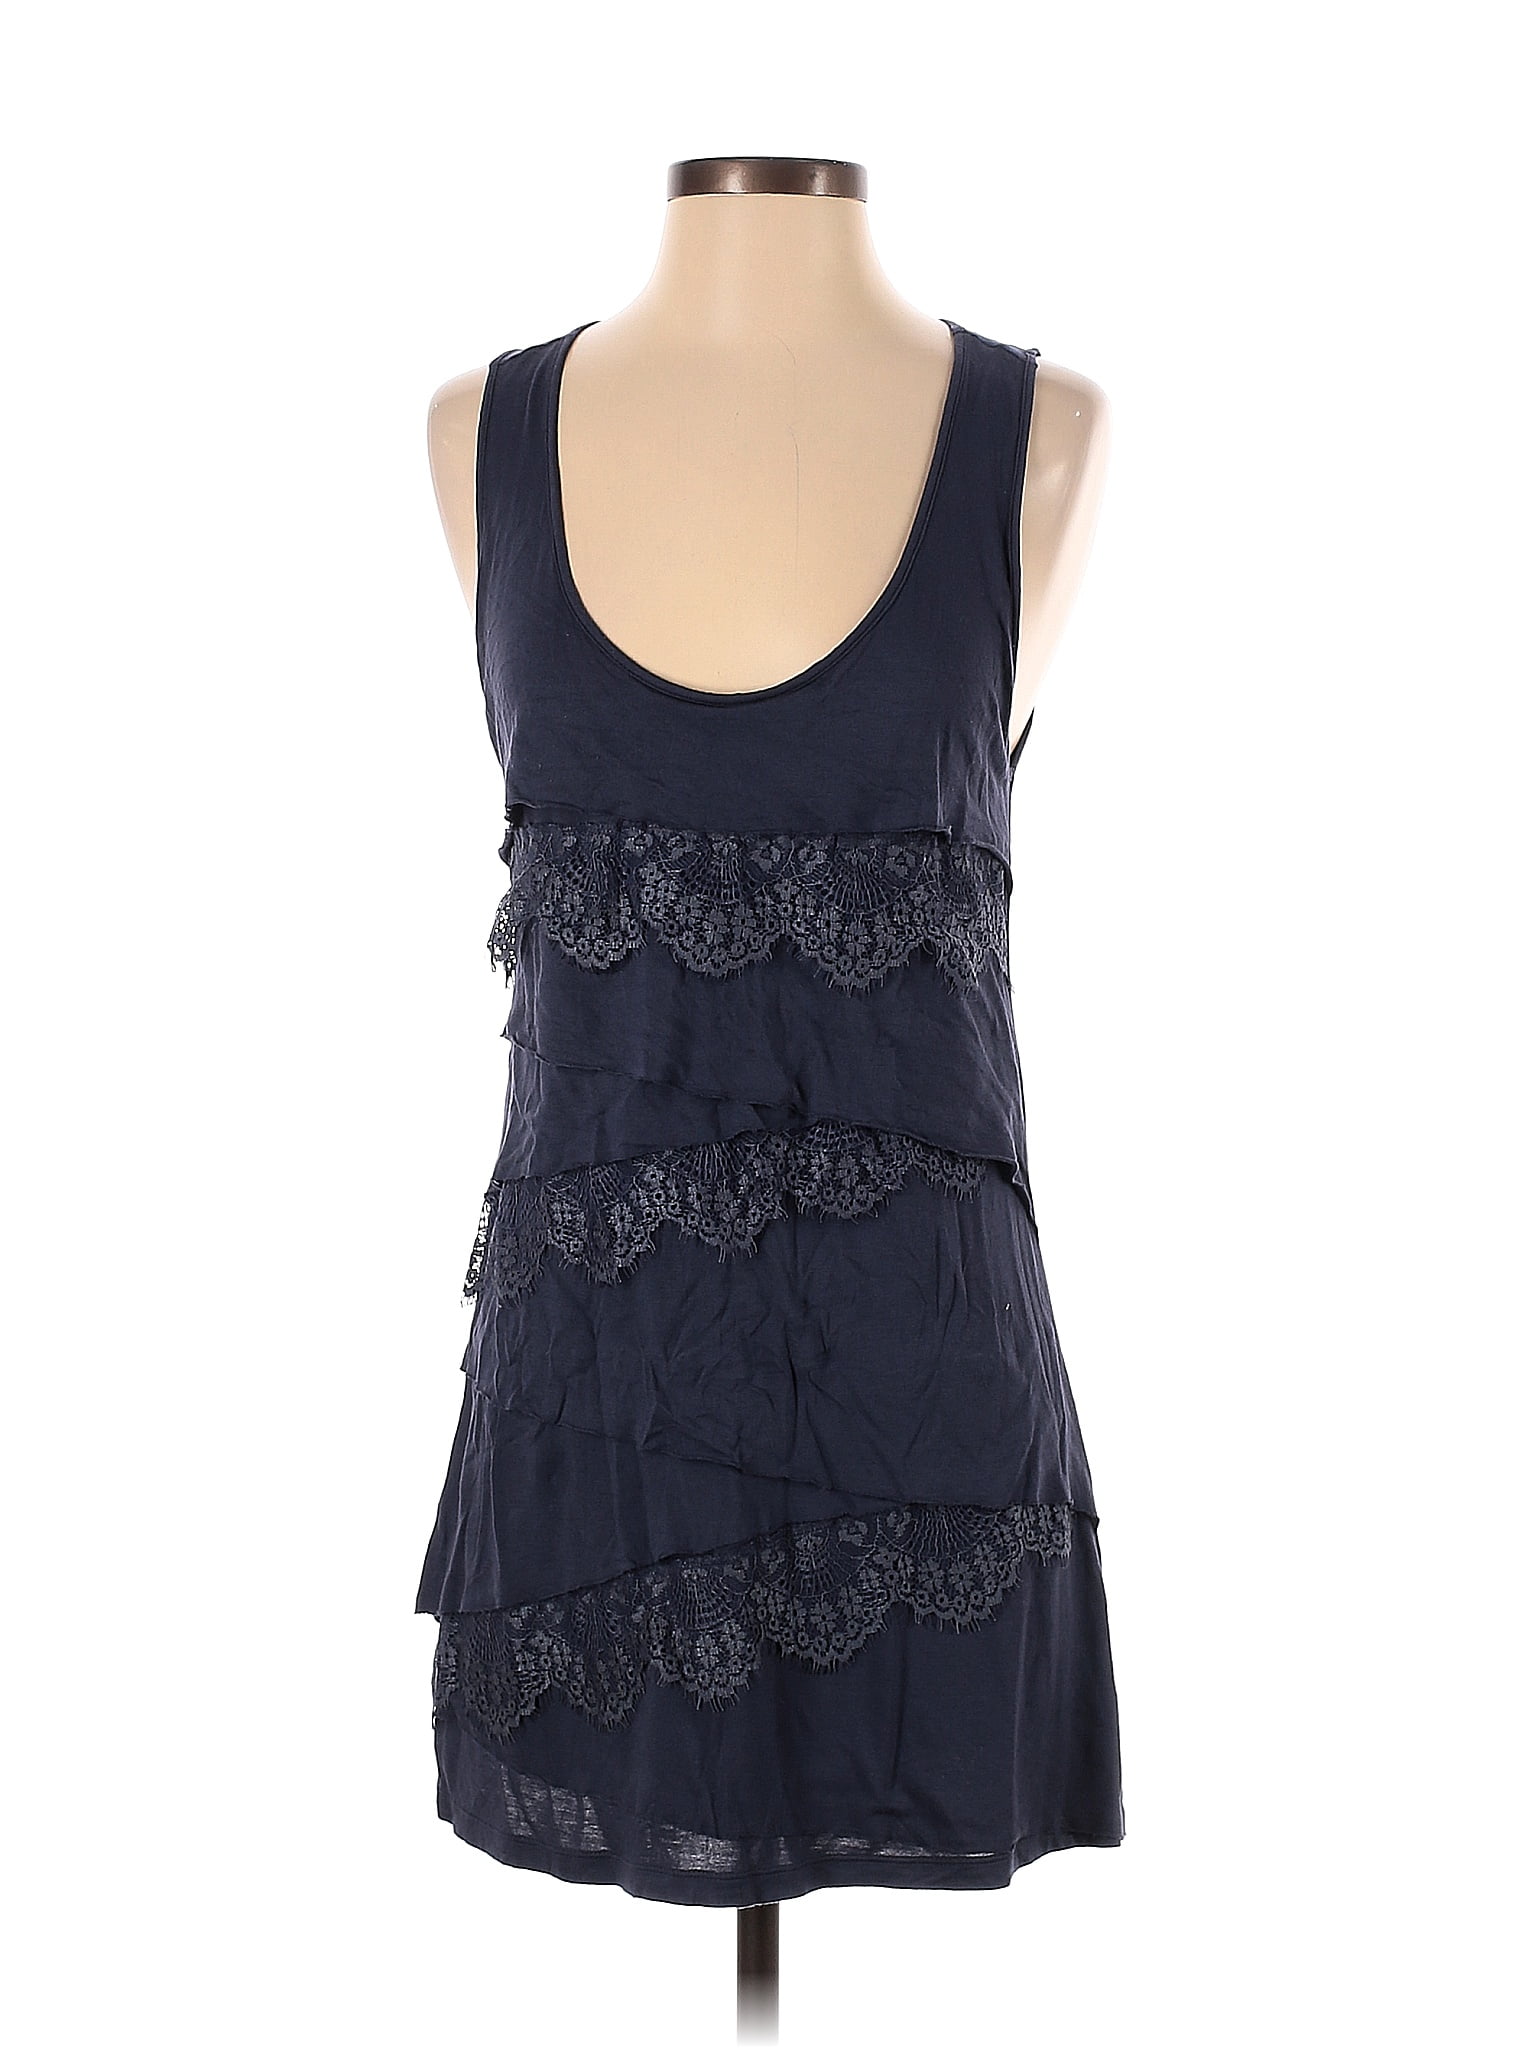 New York & Company 100% Rayon Solid Navy Blue Casual Dress Size S - 70% ...